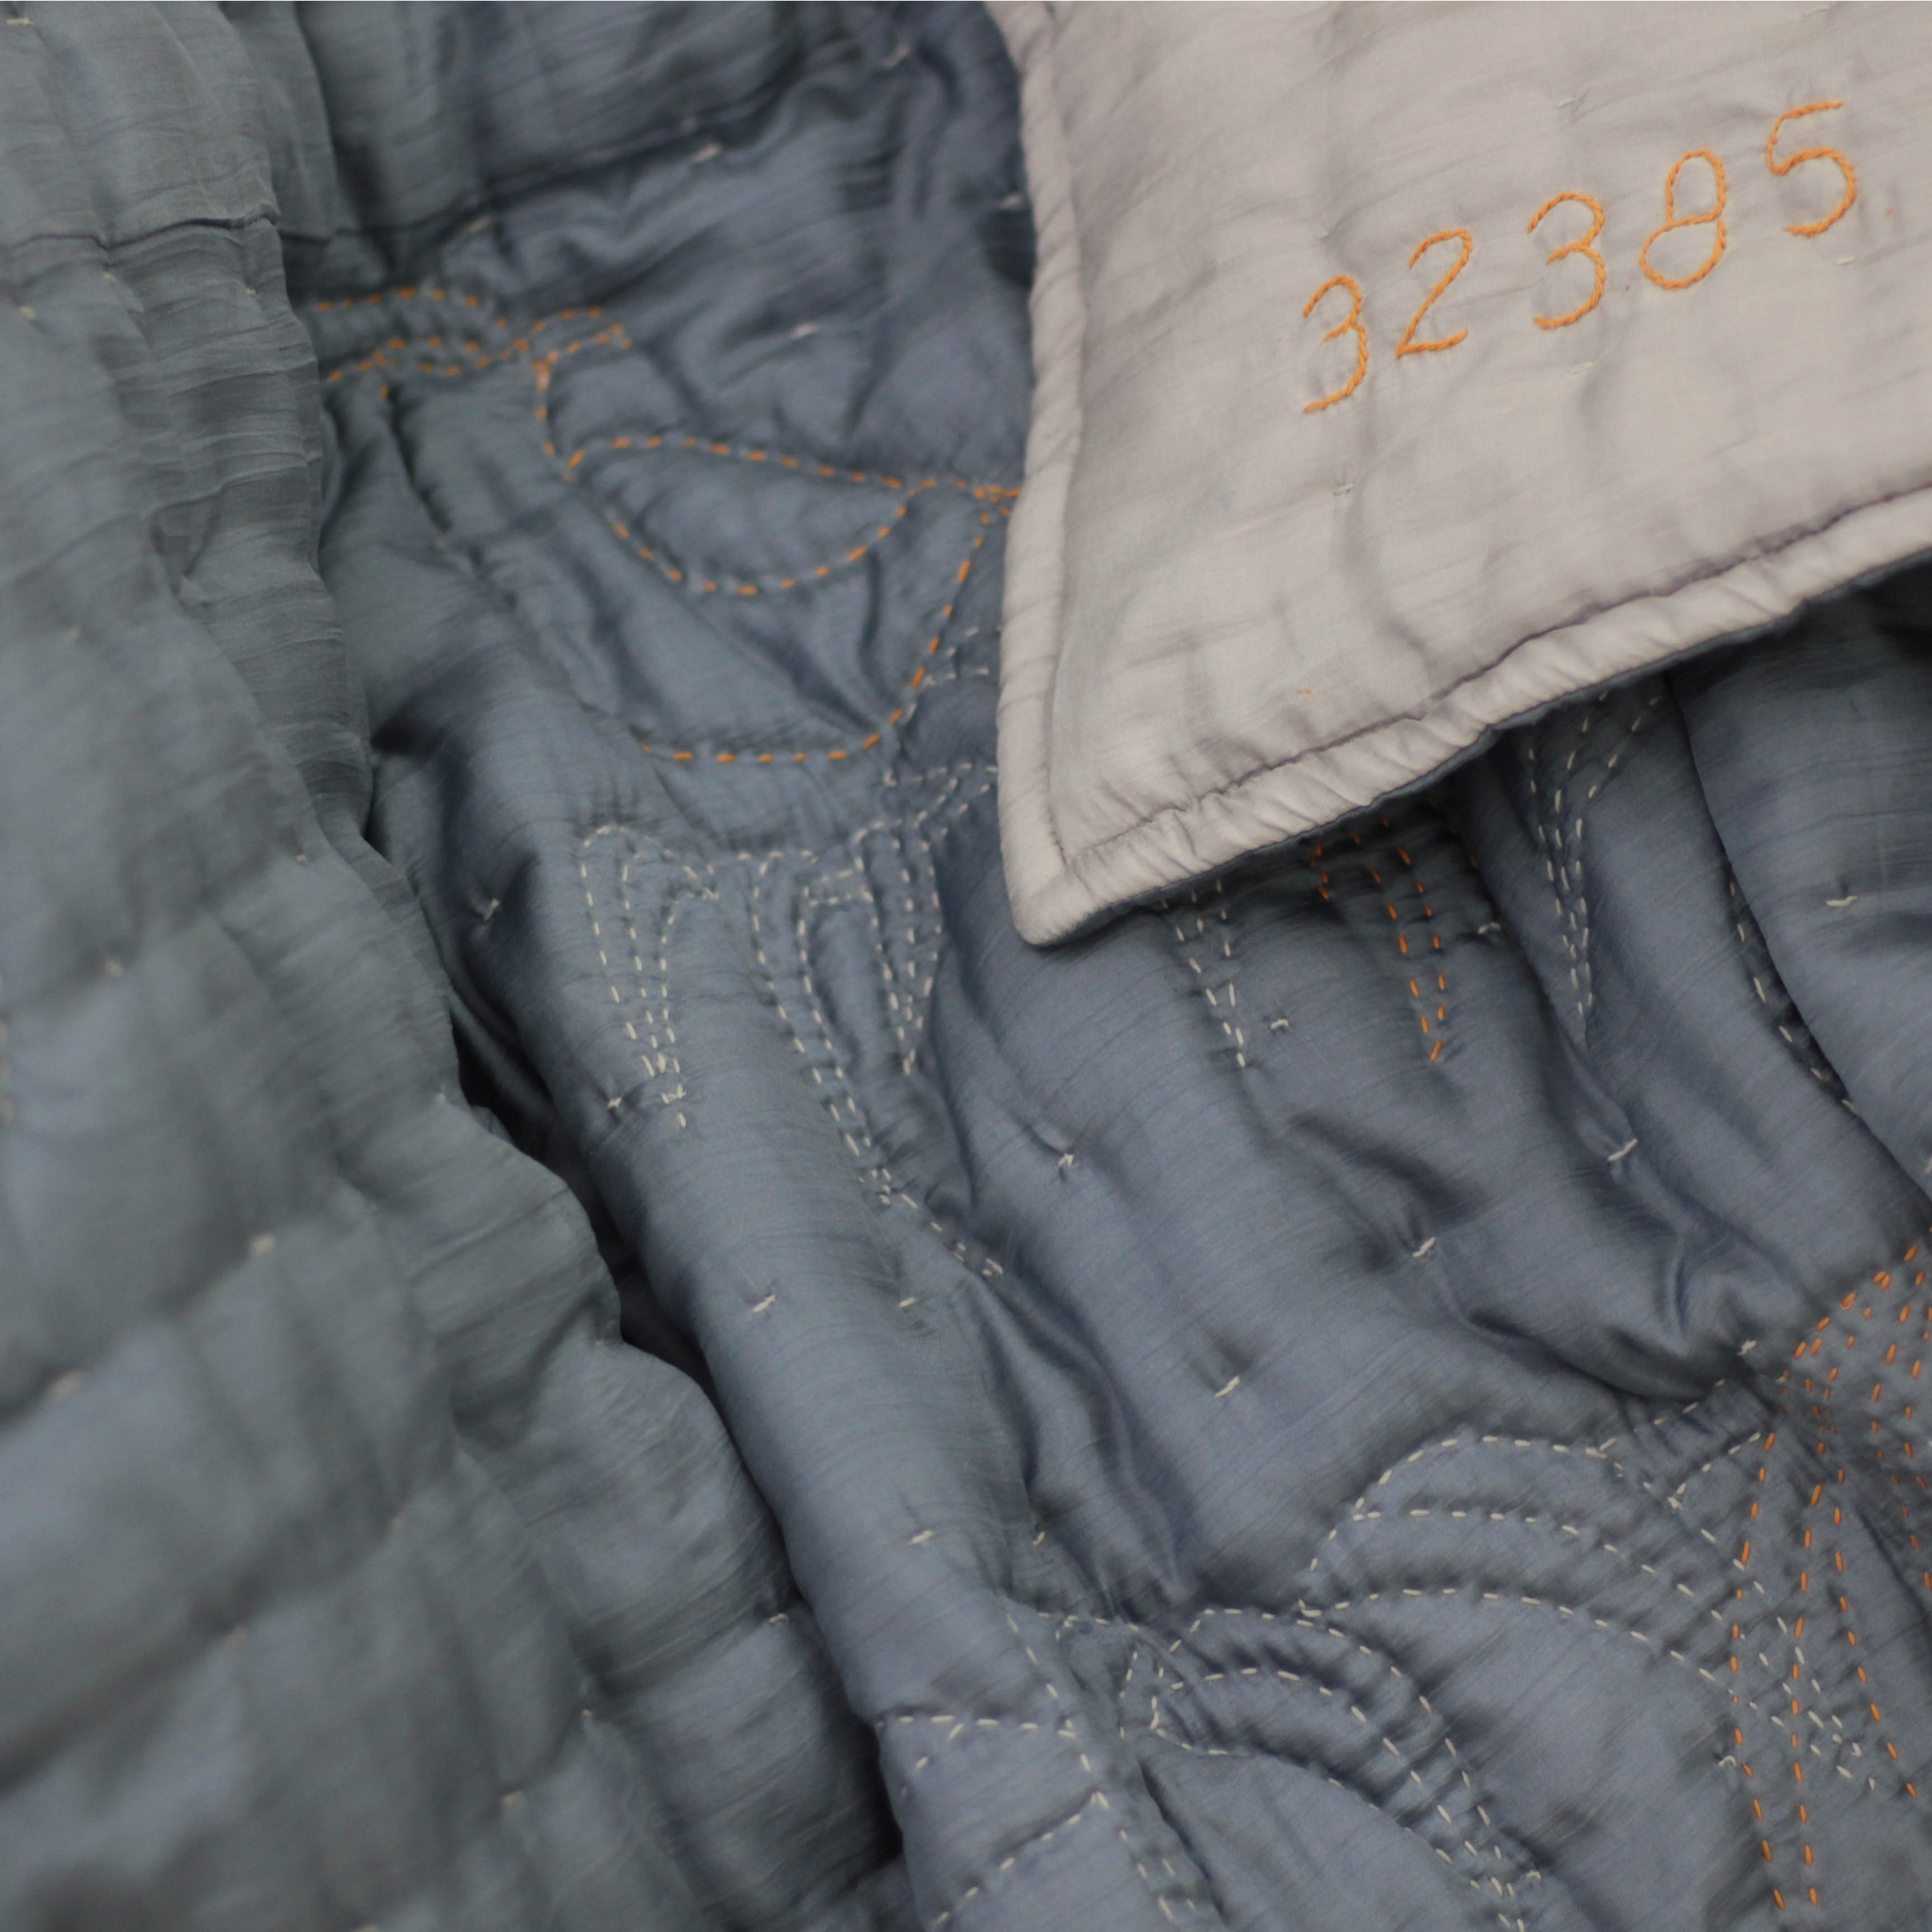 Mulberry Silk Bed Set - Quilt & Shams - The Thorn Bird Hand Embroidery